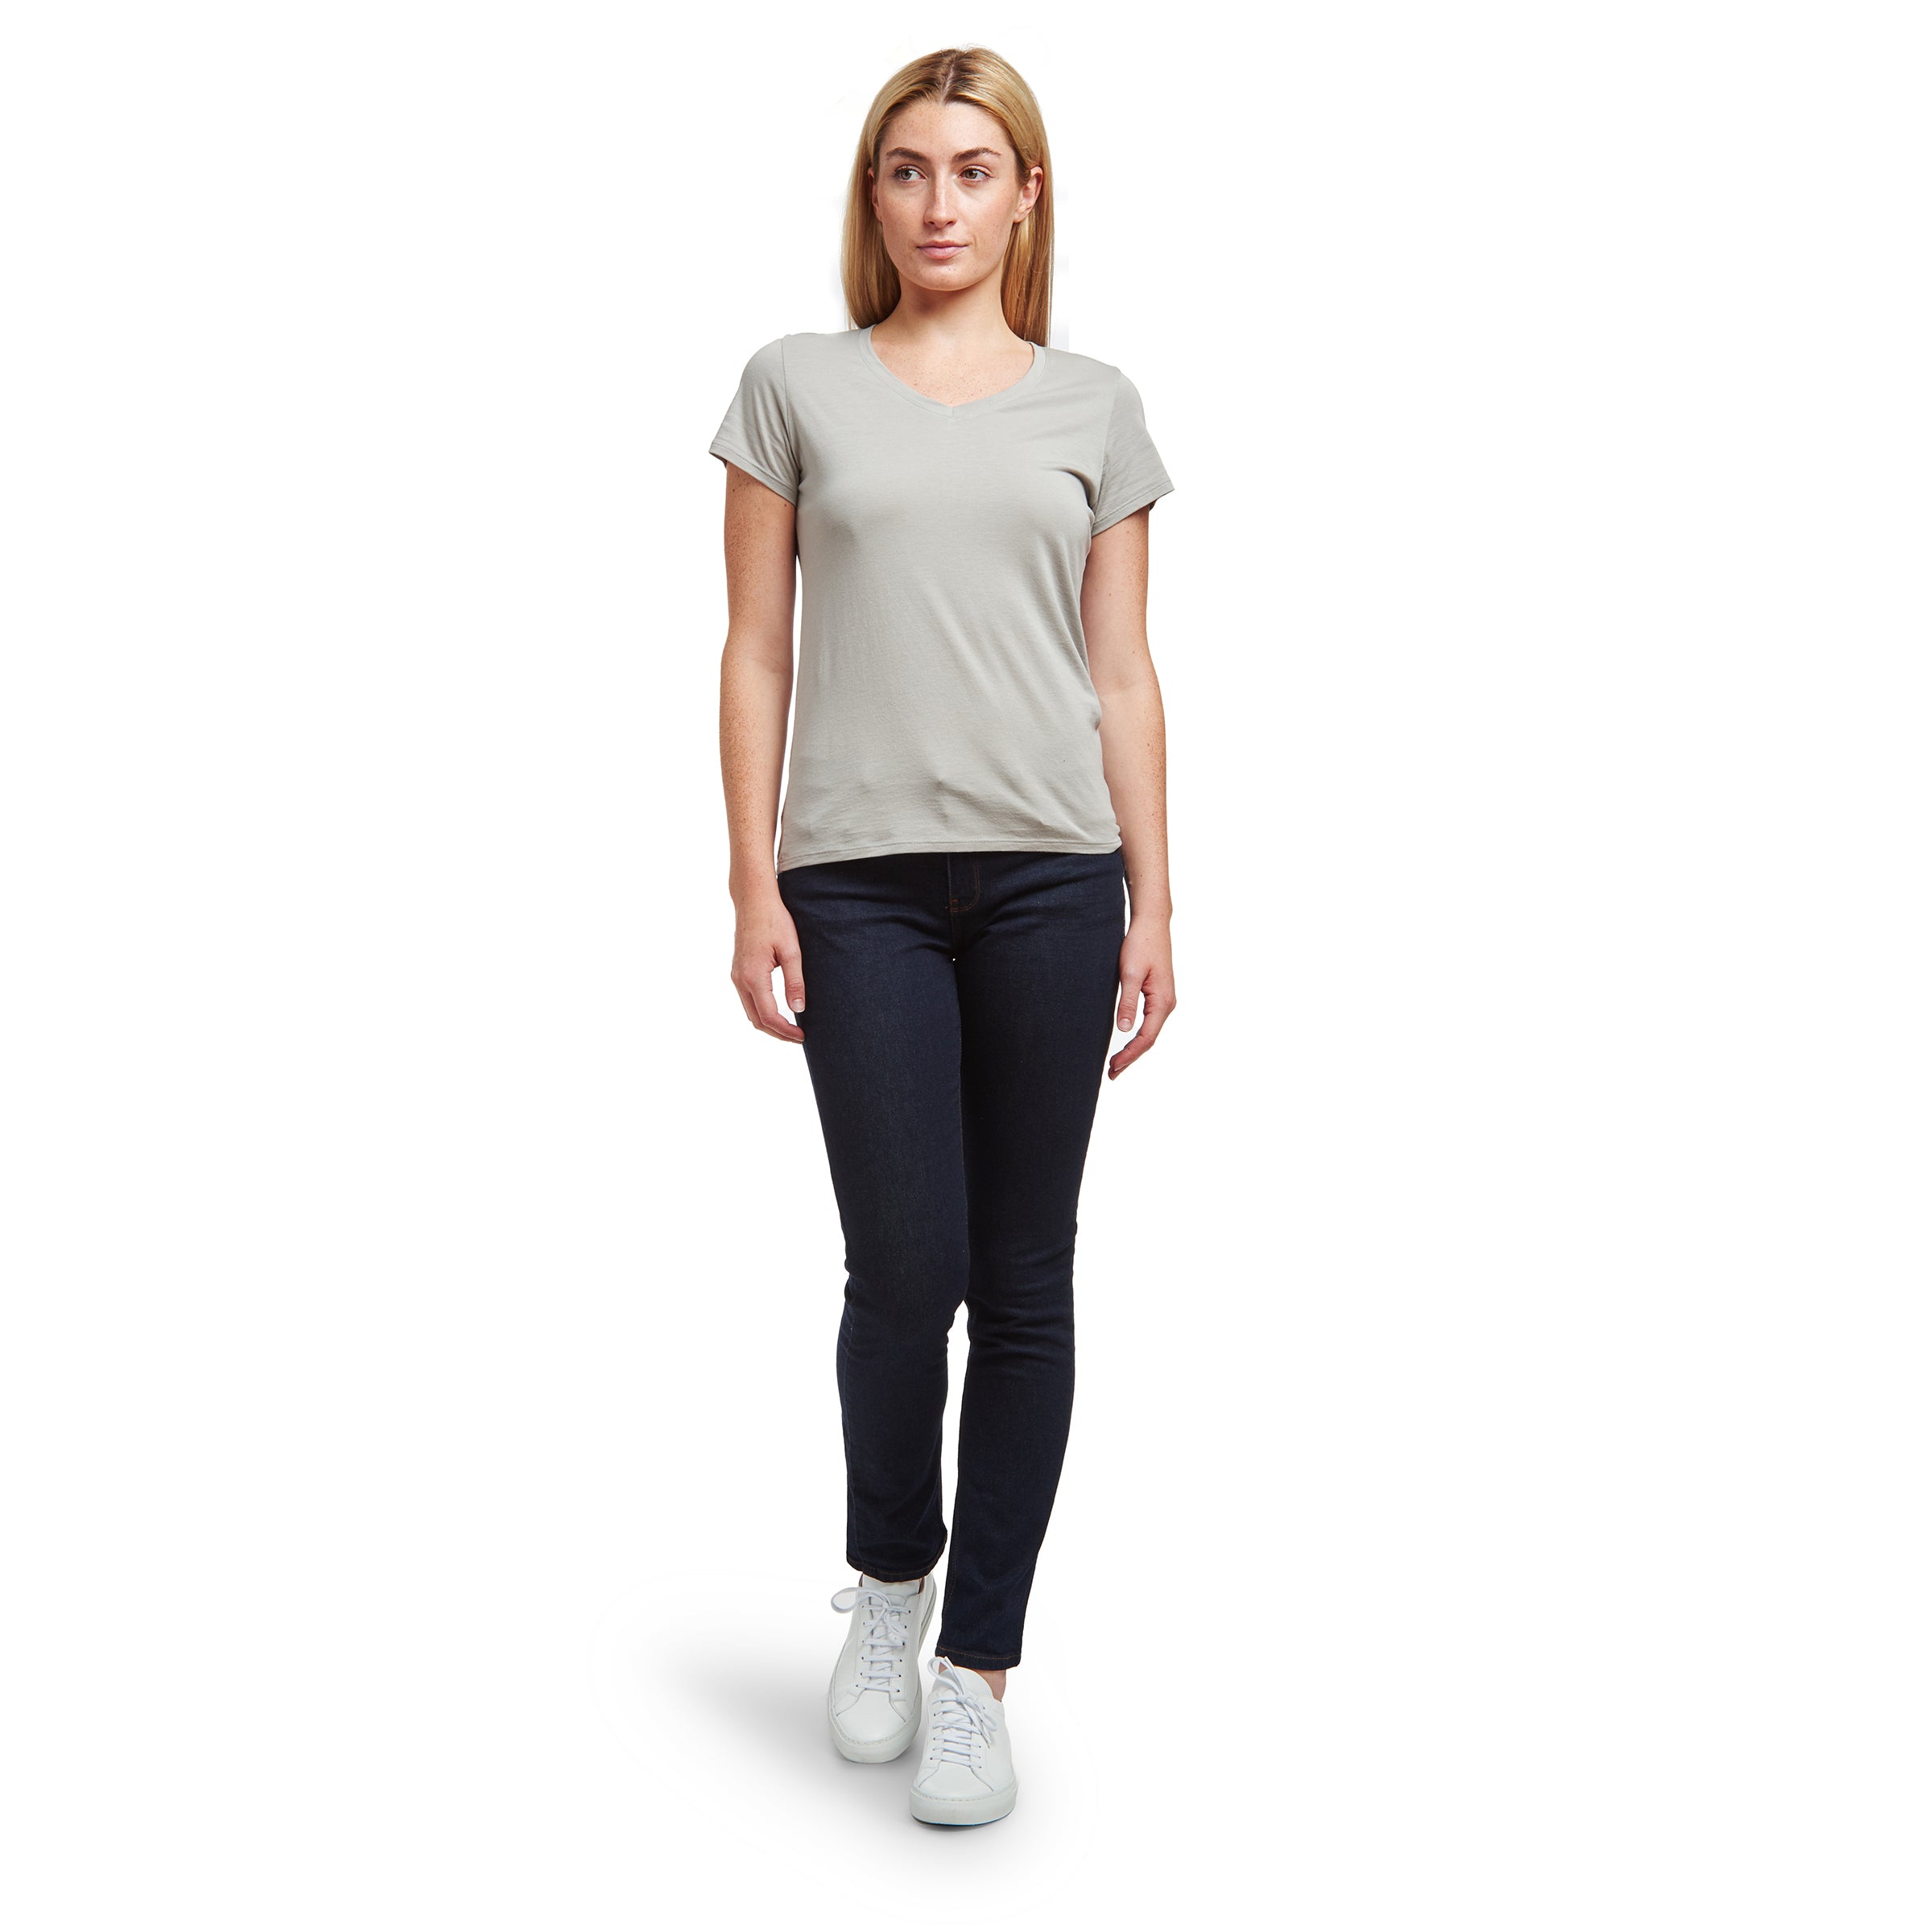 Women wearing Light Gray Fitted V-Neck Marcy Tee